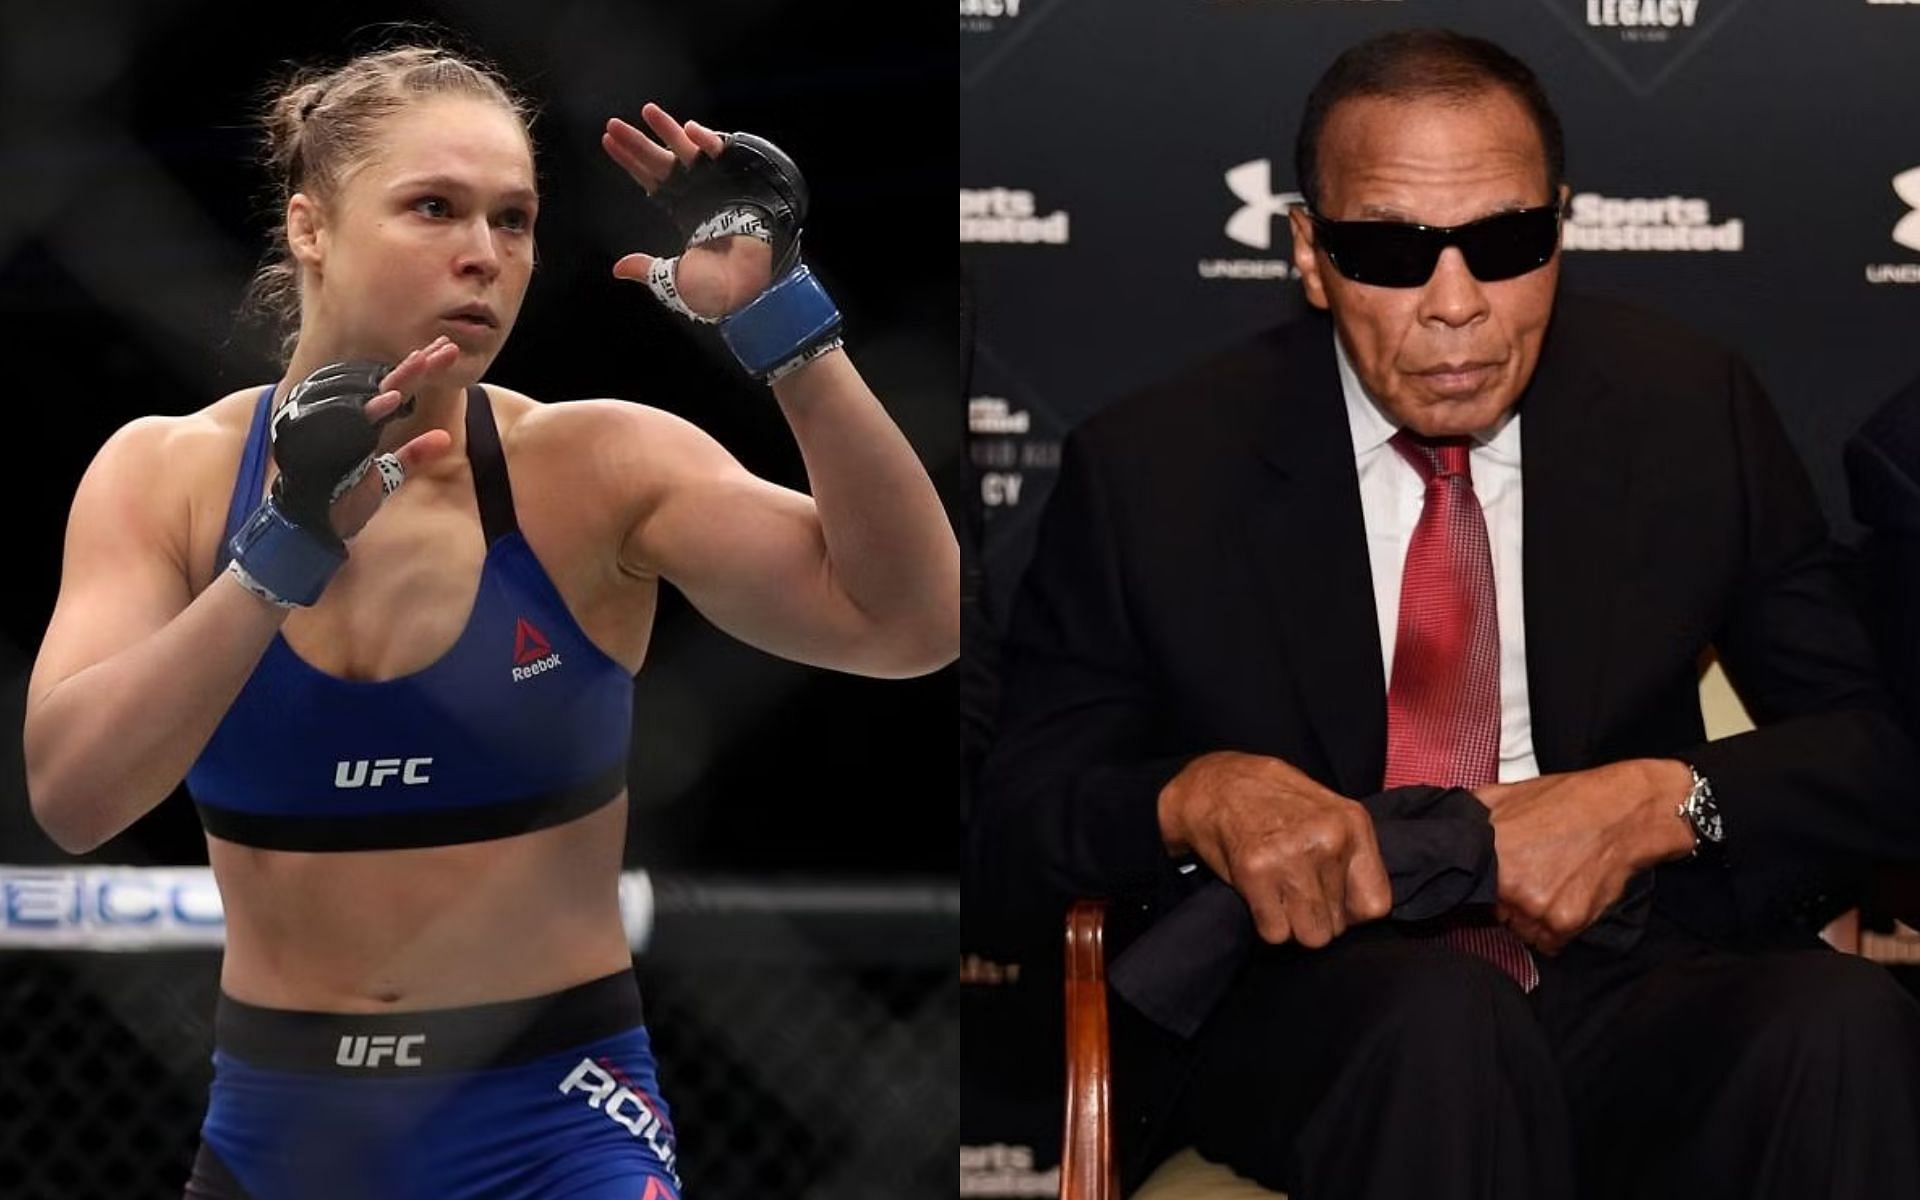 UFC legends applaud Ronda Rousey for sharing how her health influenced decision to retire from MMA [Image courtesy: Getty Images]